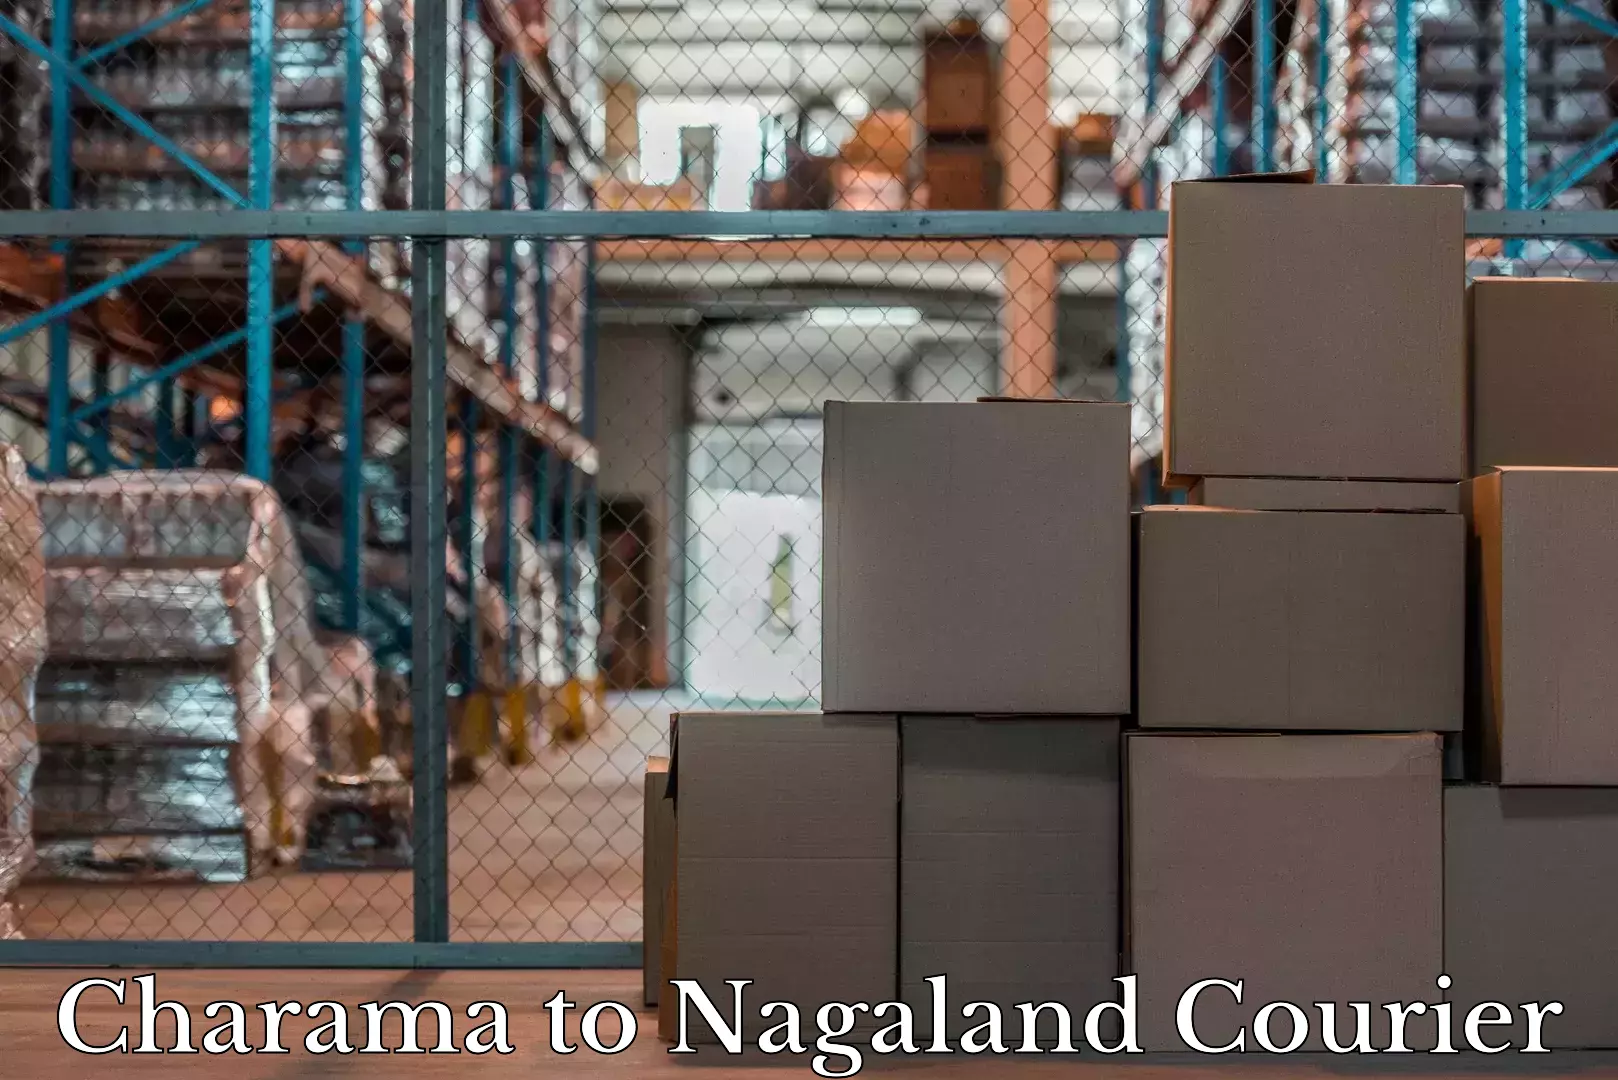 Luggage transport consultancy Charama to Nagaland